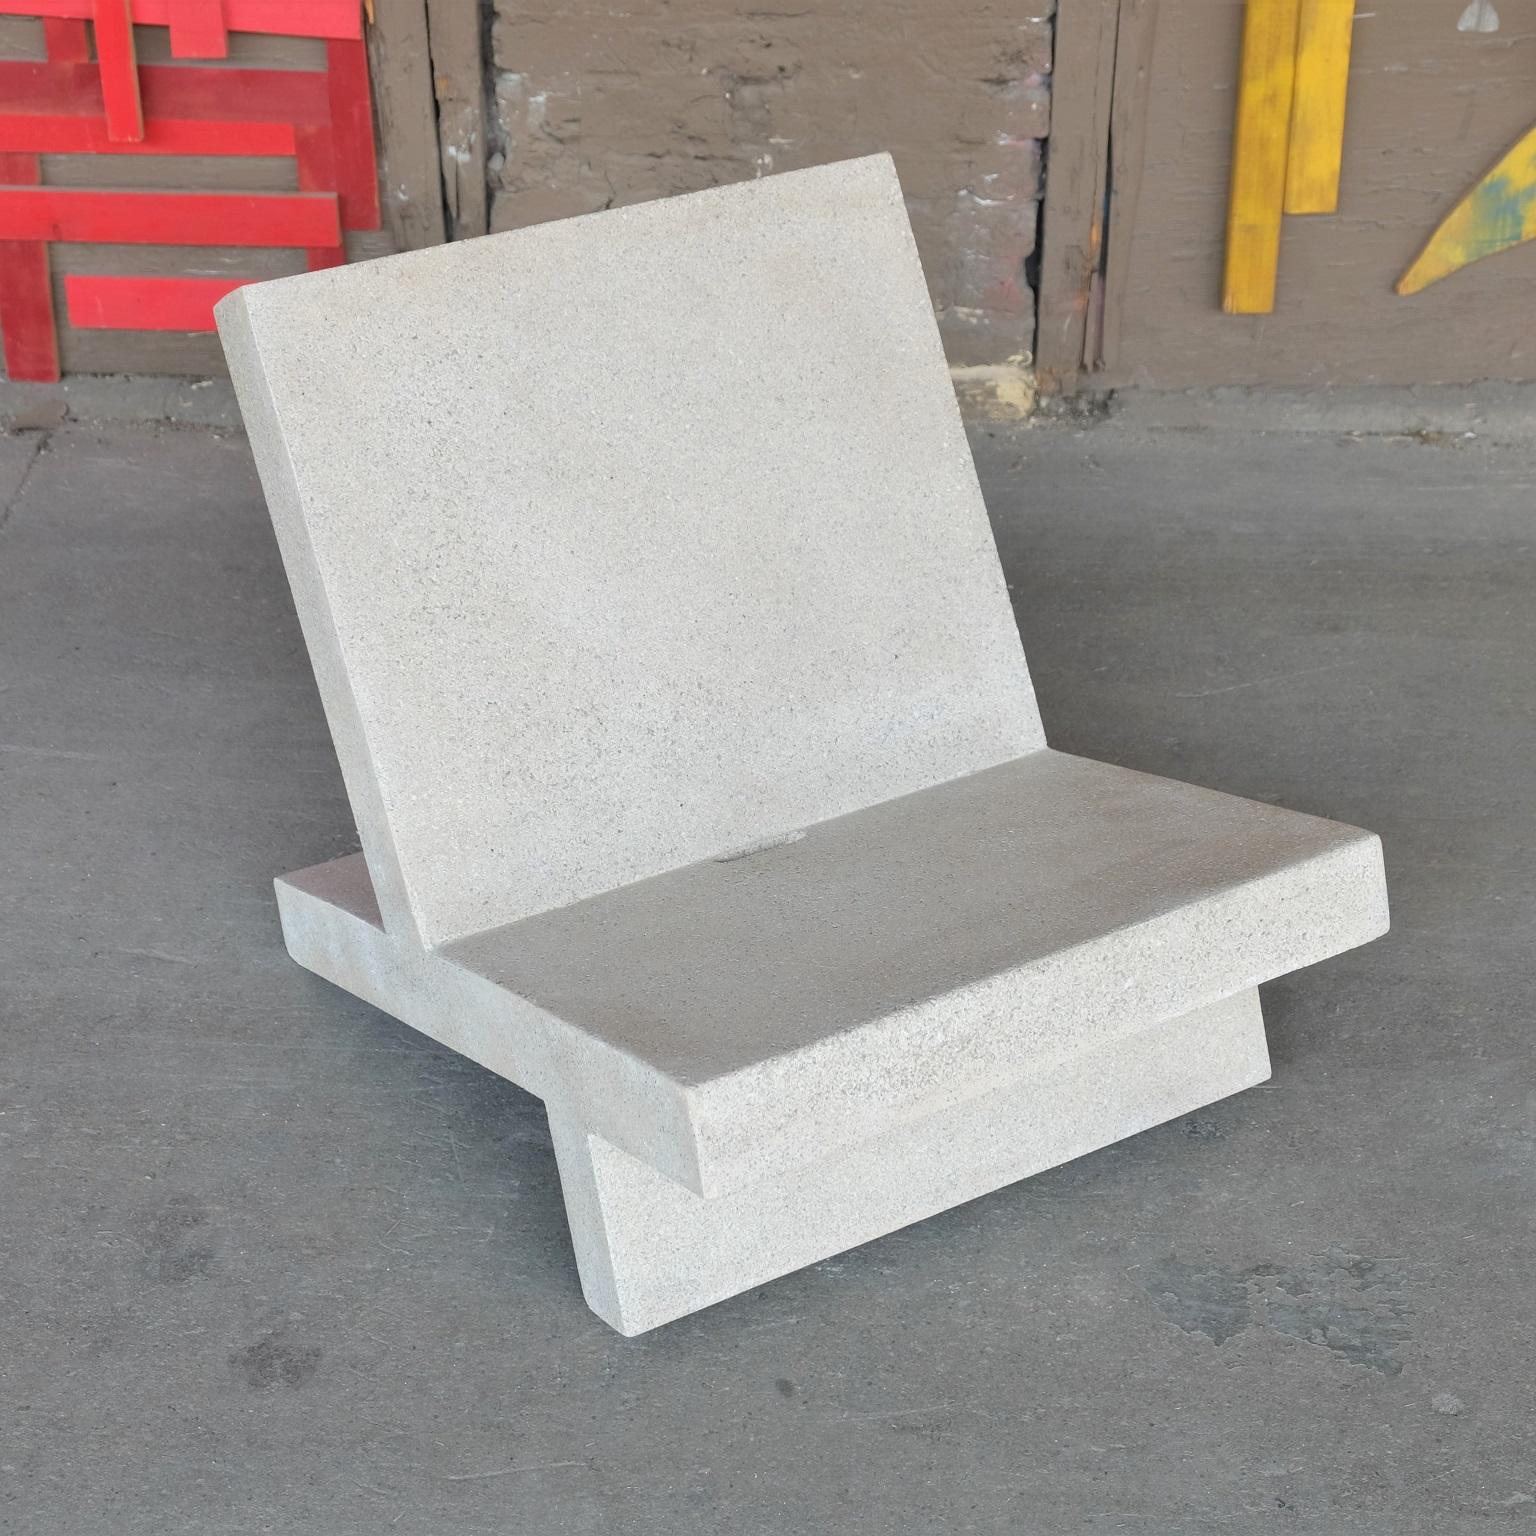 American Cast Resin 'Wavebreaker' Lounge Chair, Aged Stone Finish by Zachary A. Design For Sale